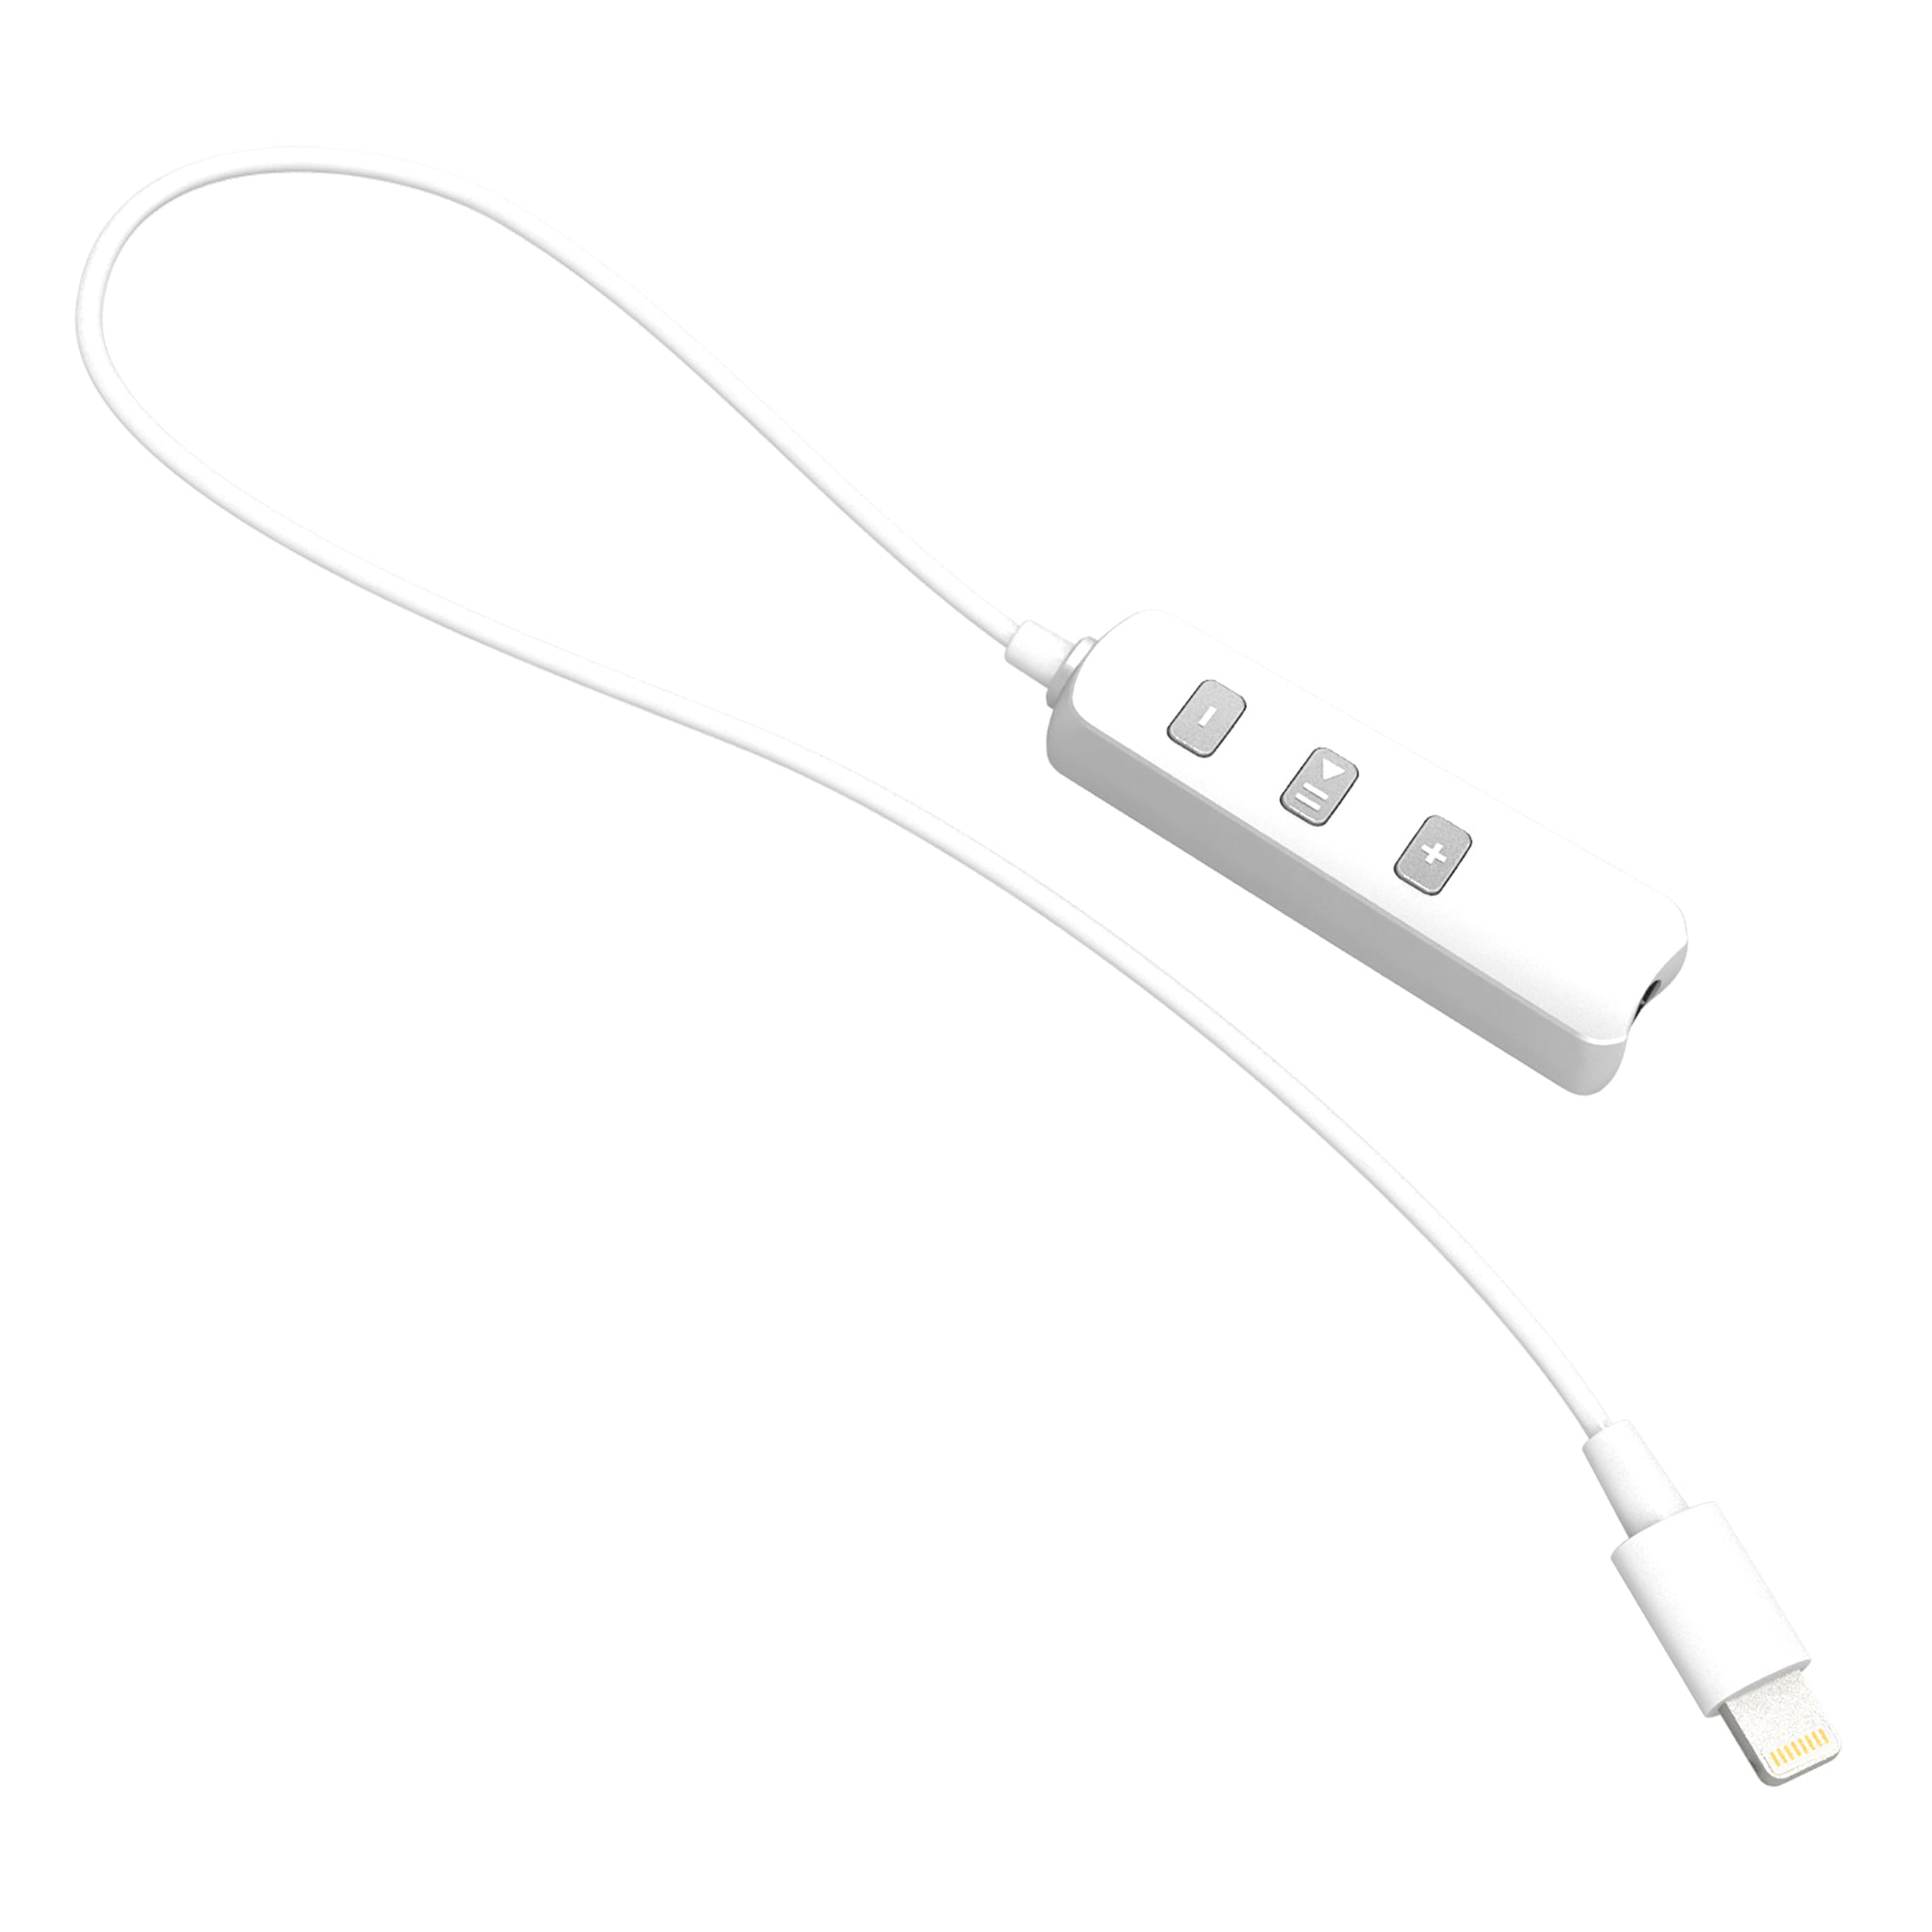 Audio Adapter with Lightning® Connector | j5create